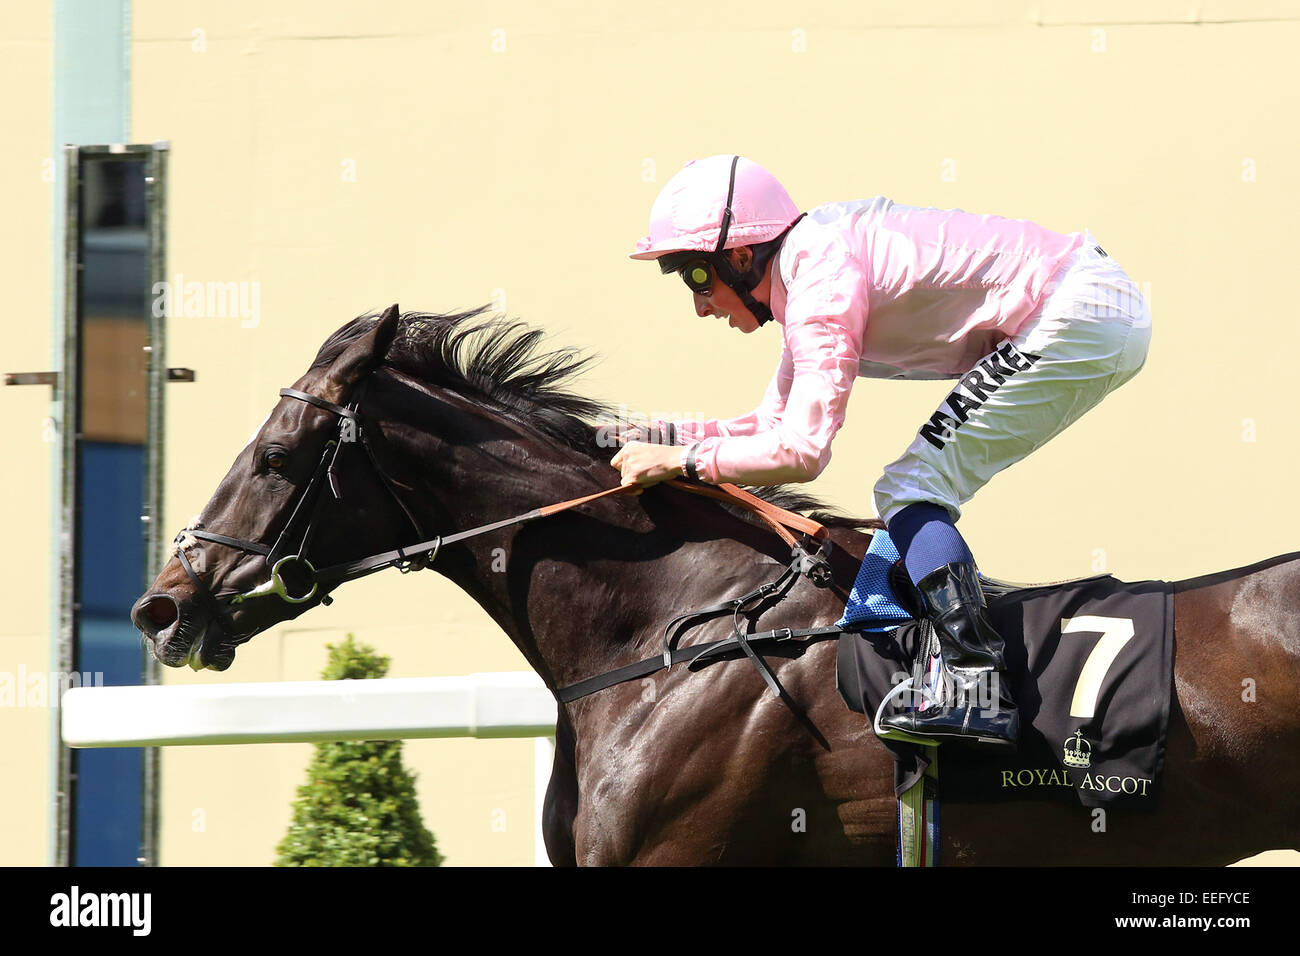 Royal Ascot, The Fugue with William Buick up wins the Prince of Wales's Stakes Stock Photo